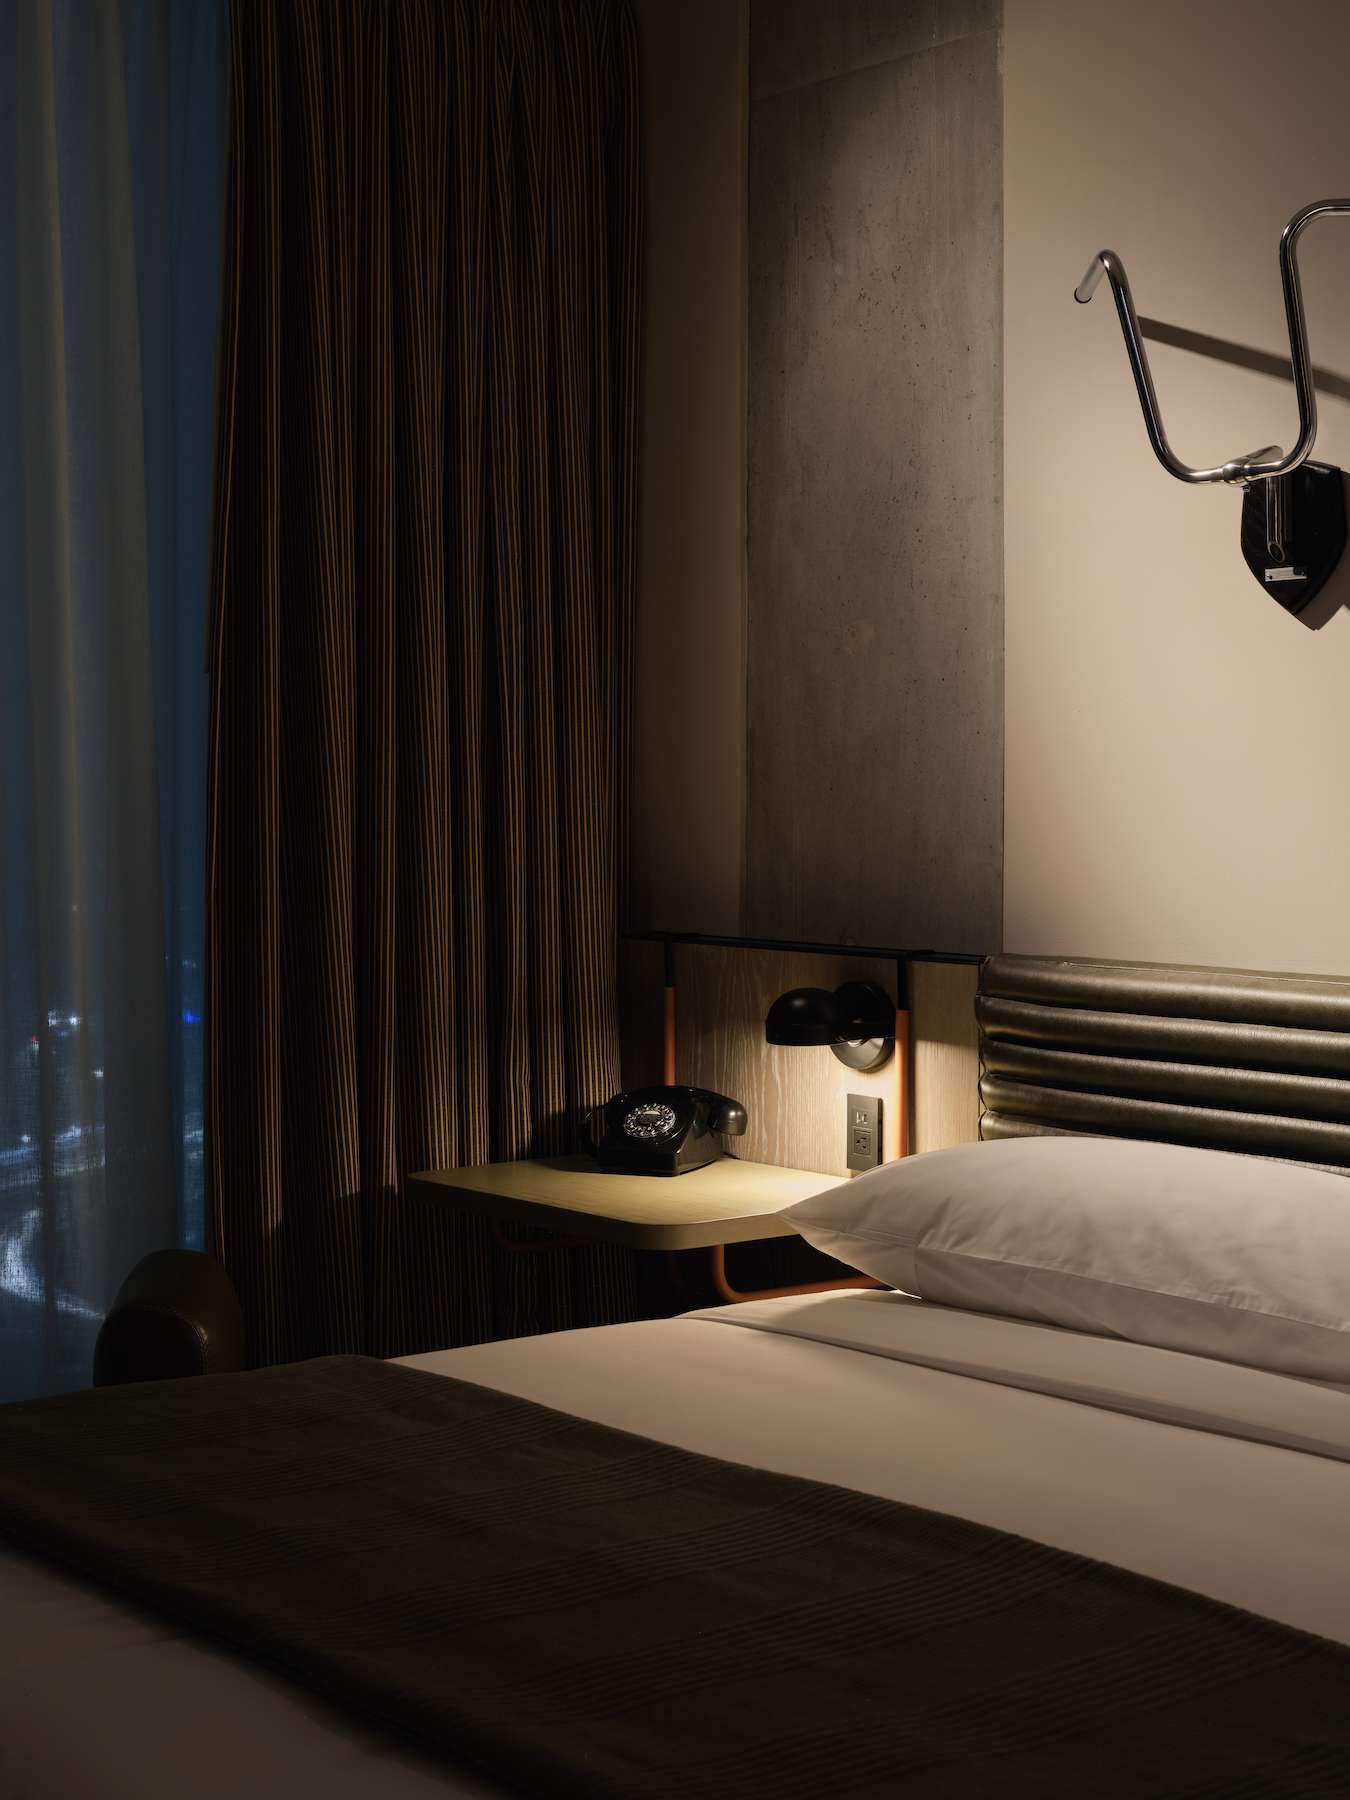 Bedroom at the Moxy Hotel in Los Angeles, interior designed by Yabu Pushelberg - Effect Magazine